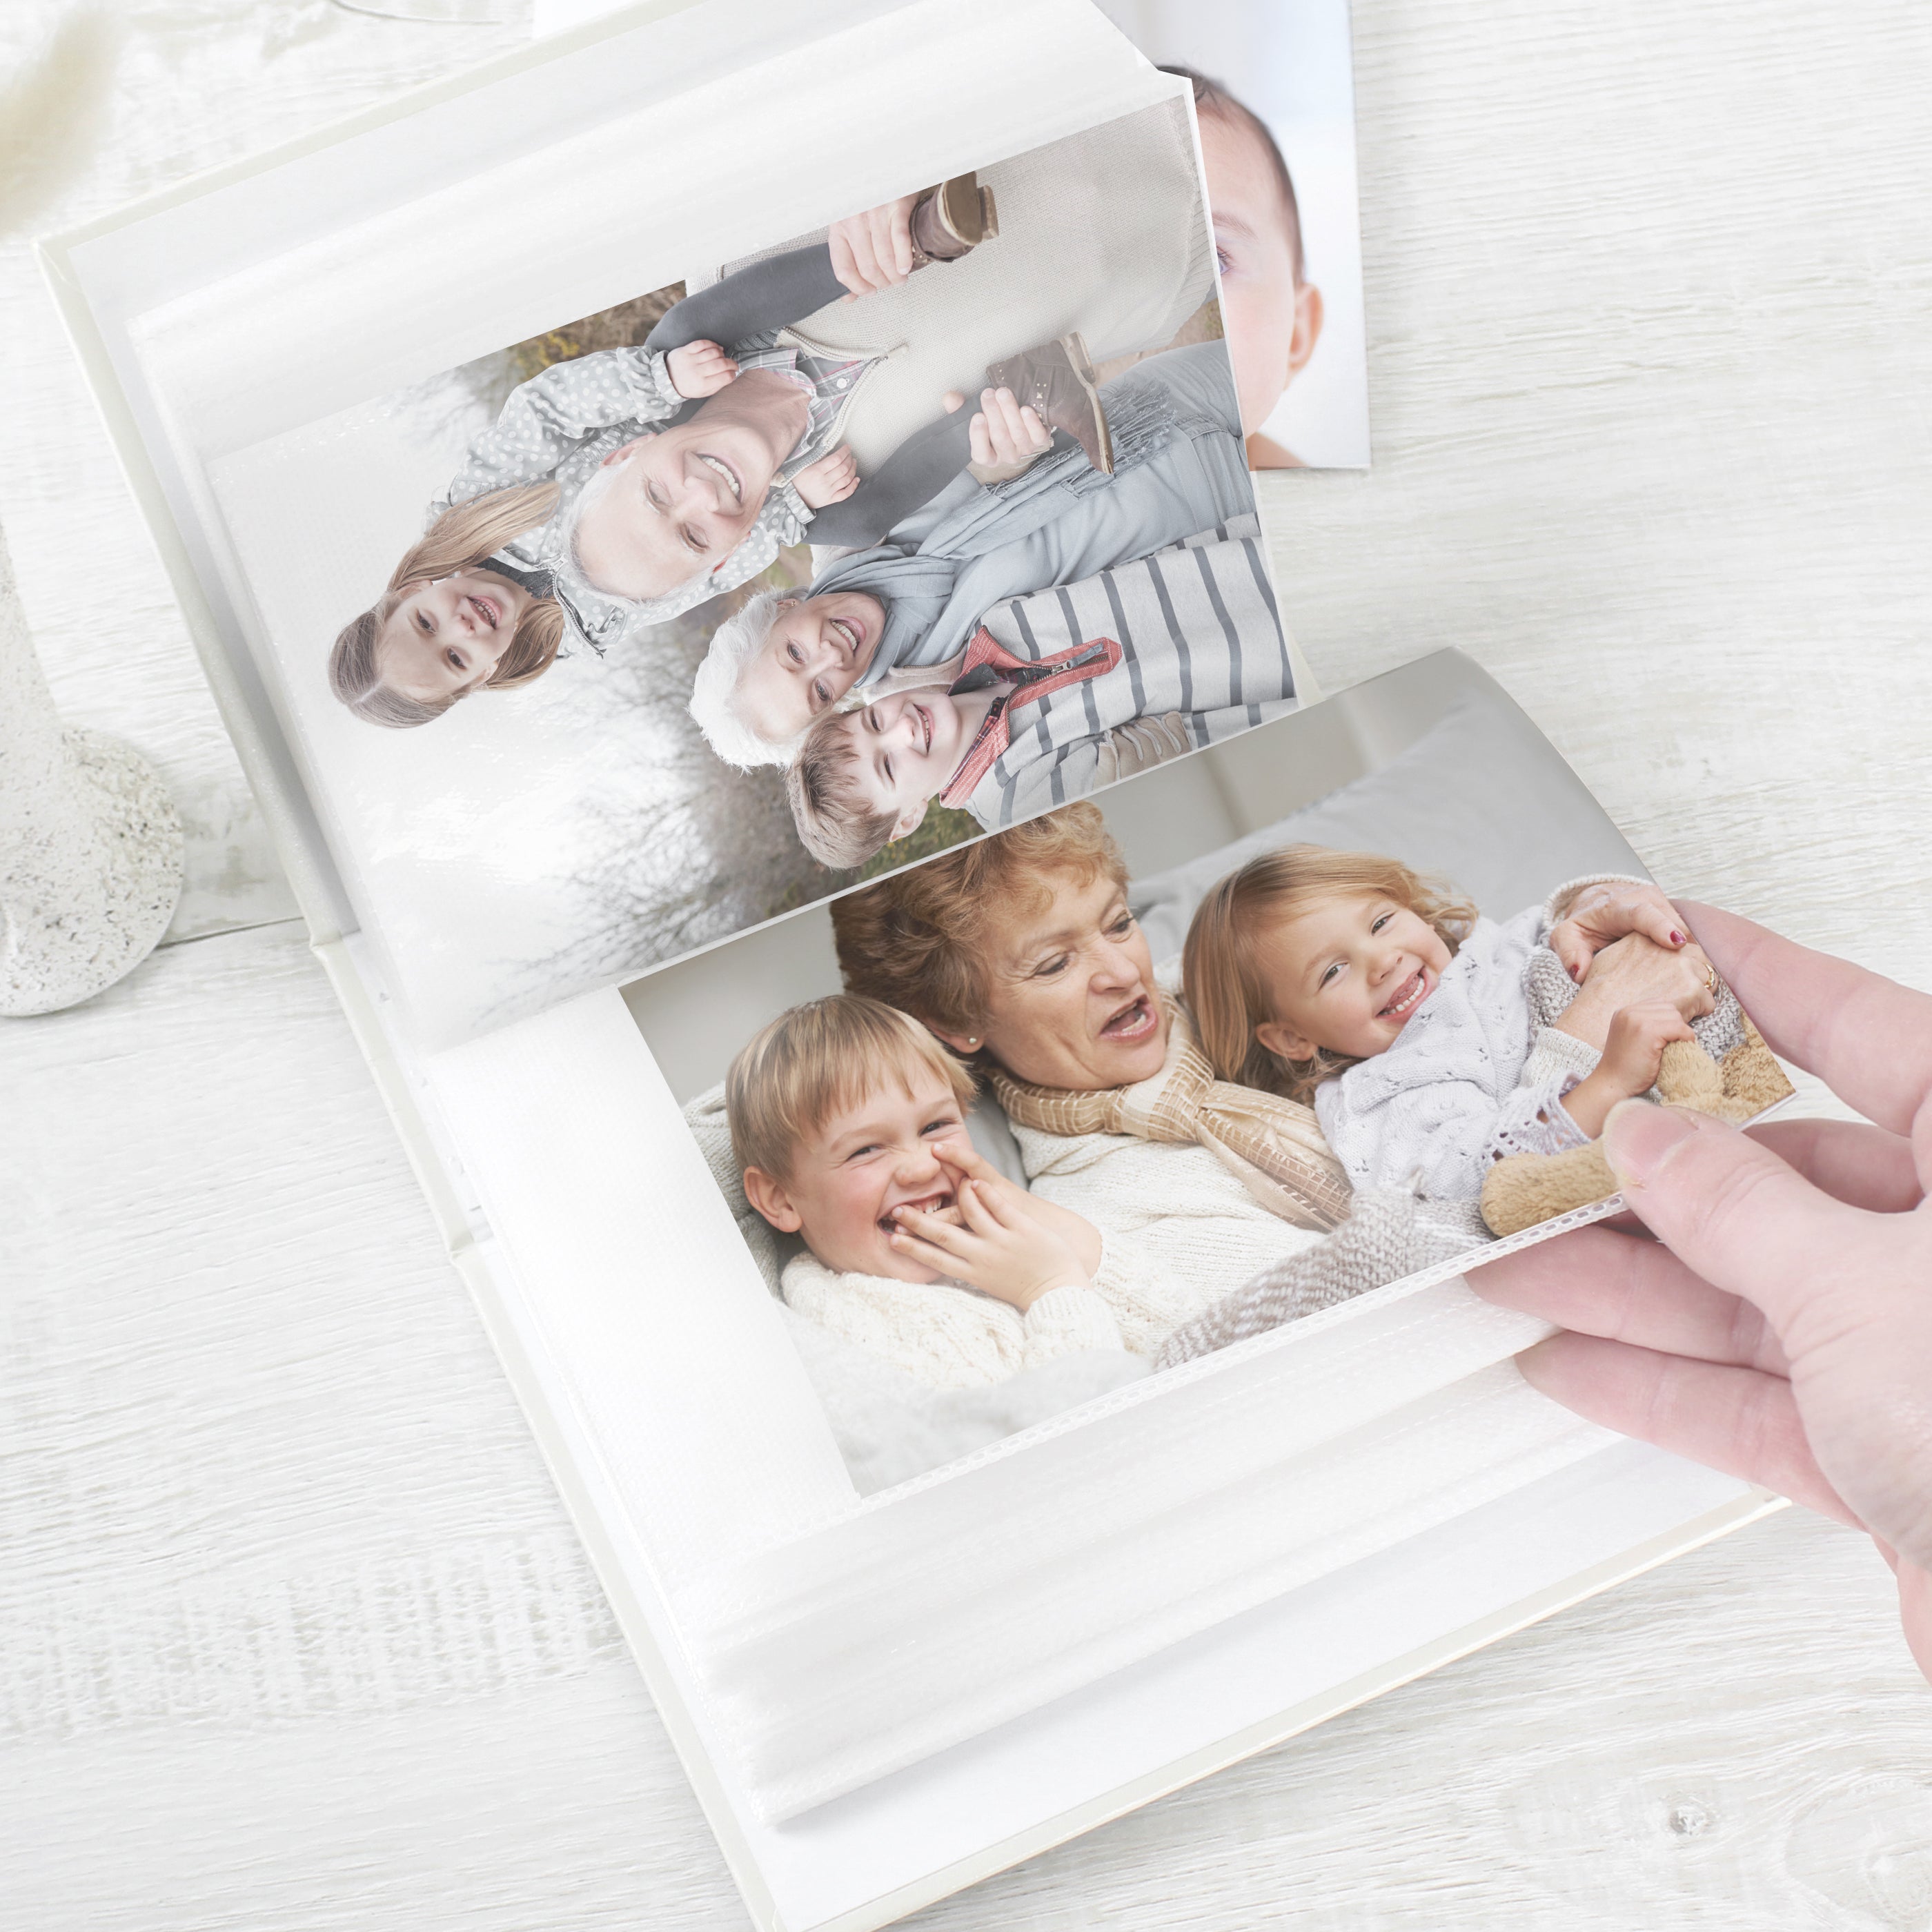 Personalised In Loving Memory 6x4 Photo Album with Sleeves